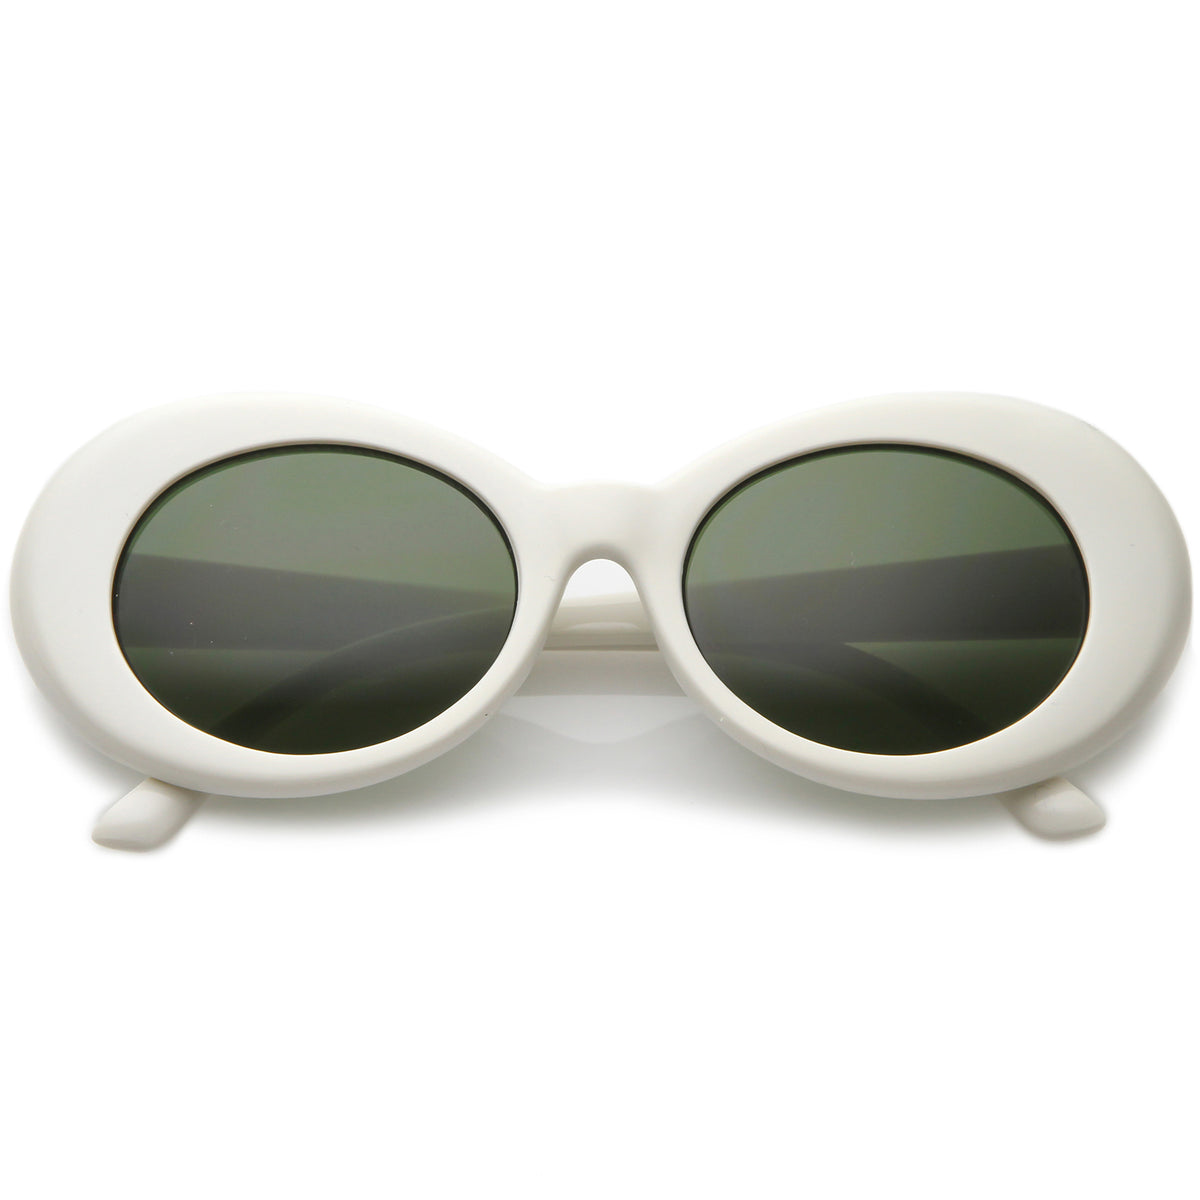 Retro White Oval Sunglasses With Tapered Arms Colored Round Lens 51mm Sunglass La